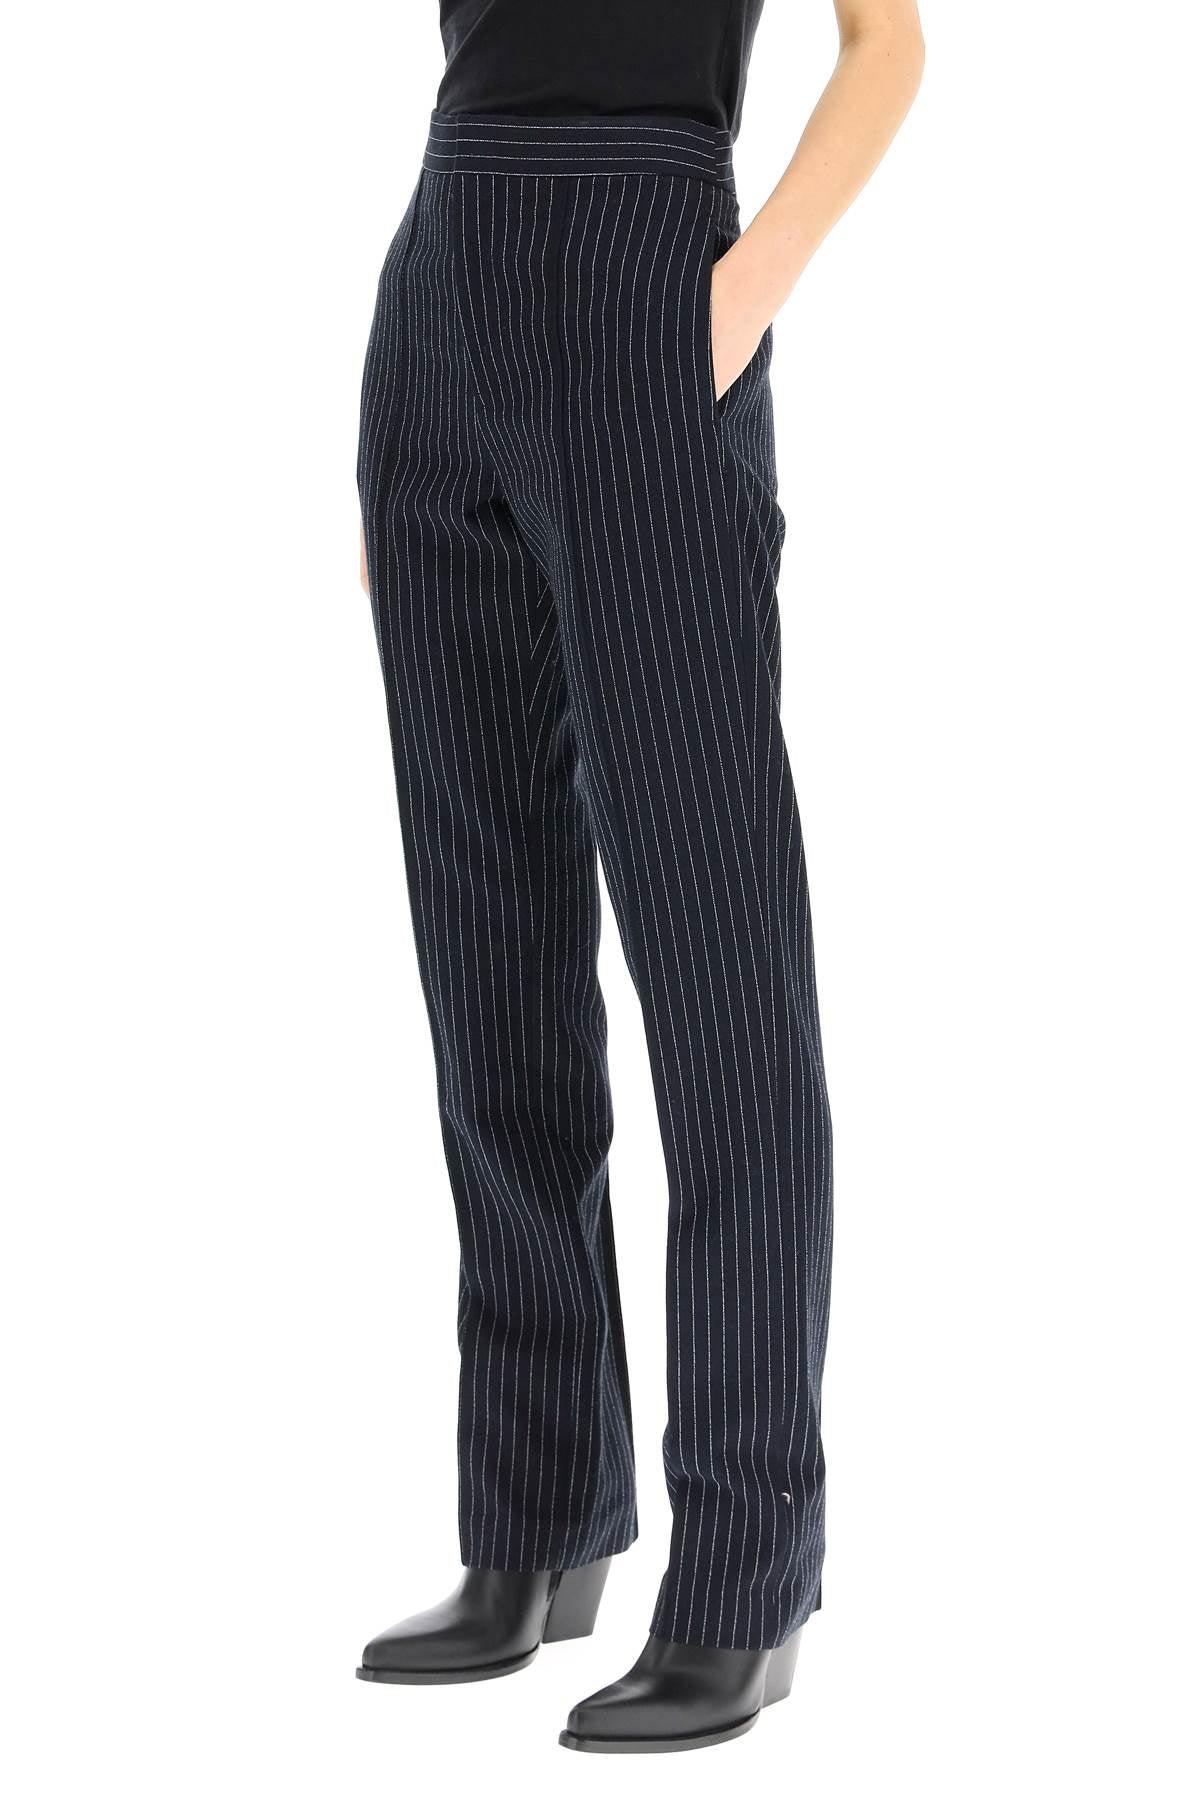 Isabel Marant Synthetic Jarokia Trousers in Blue - Lyst